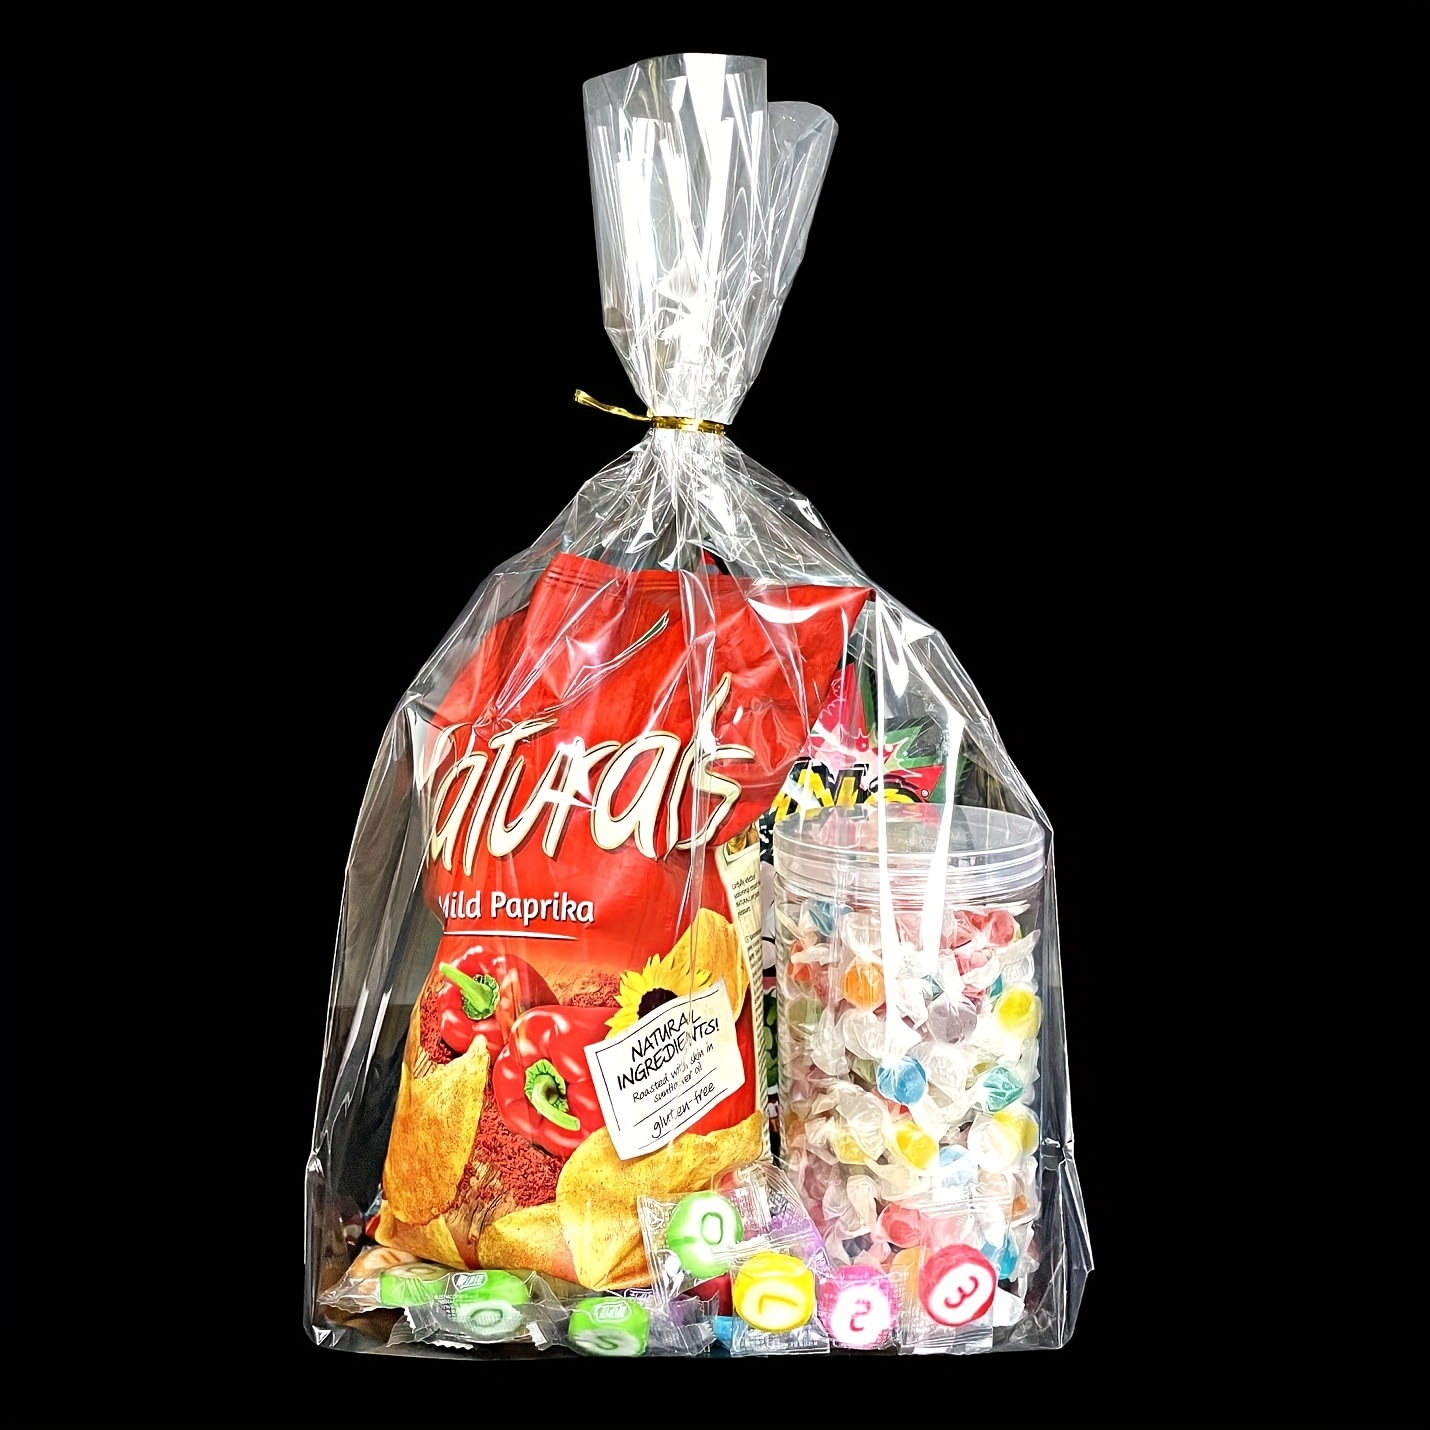 Cellophane Bags 100 Pcs Mix Colors 6 inch x 9 inch | Colorful Cello Treat Bags W